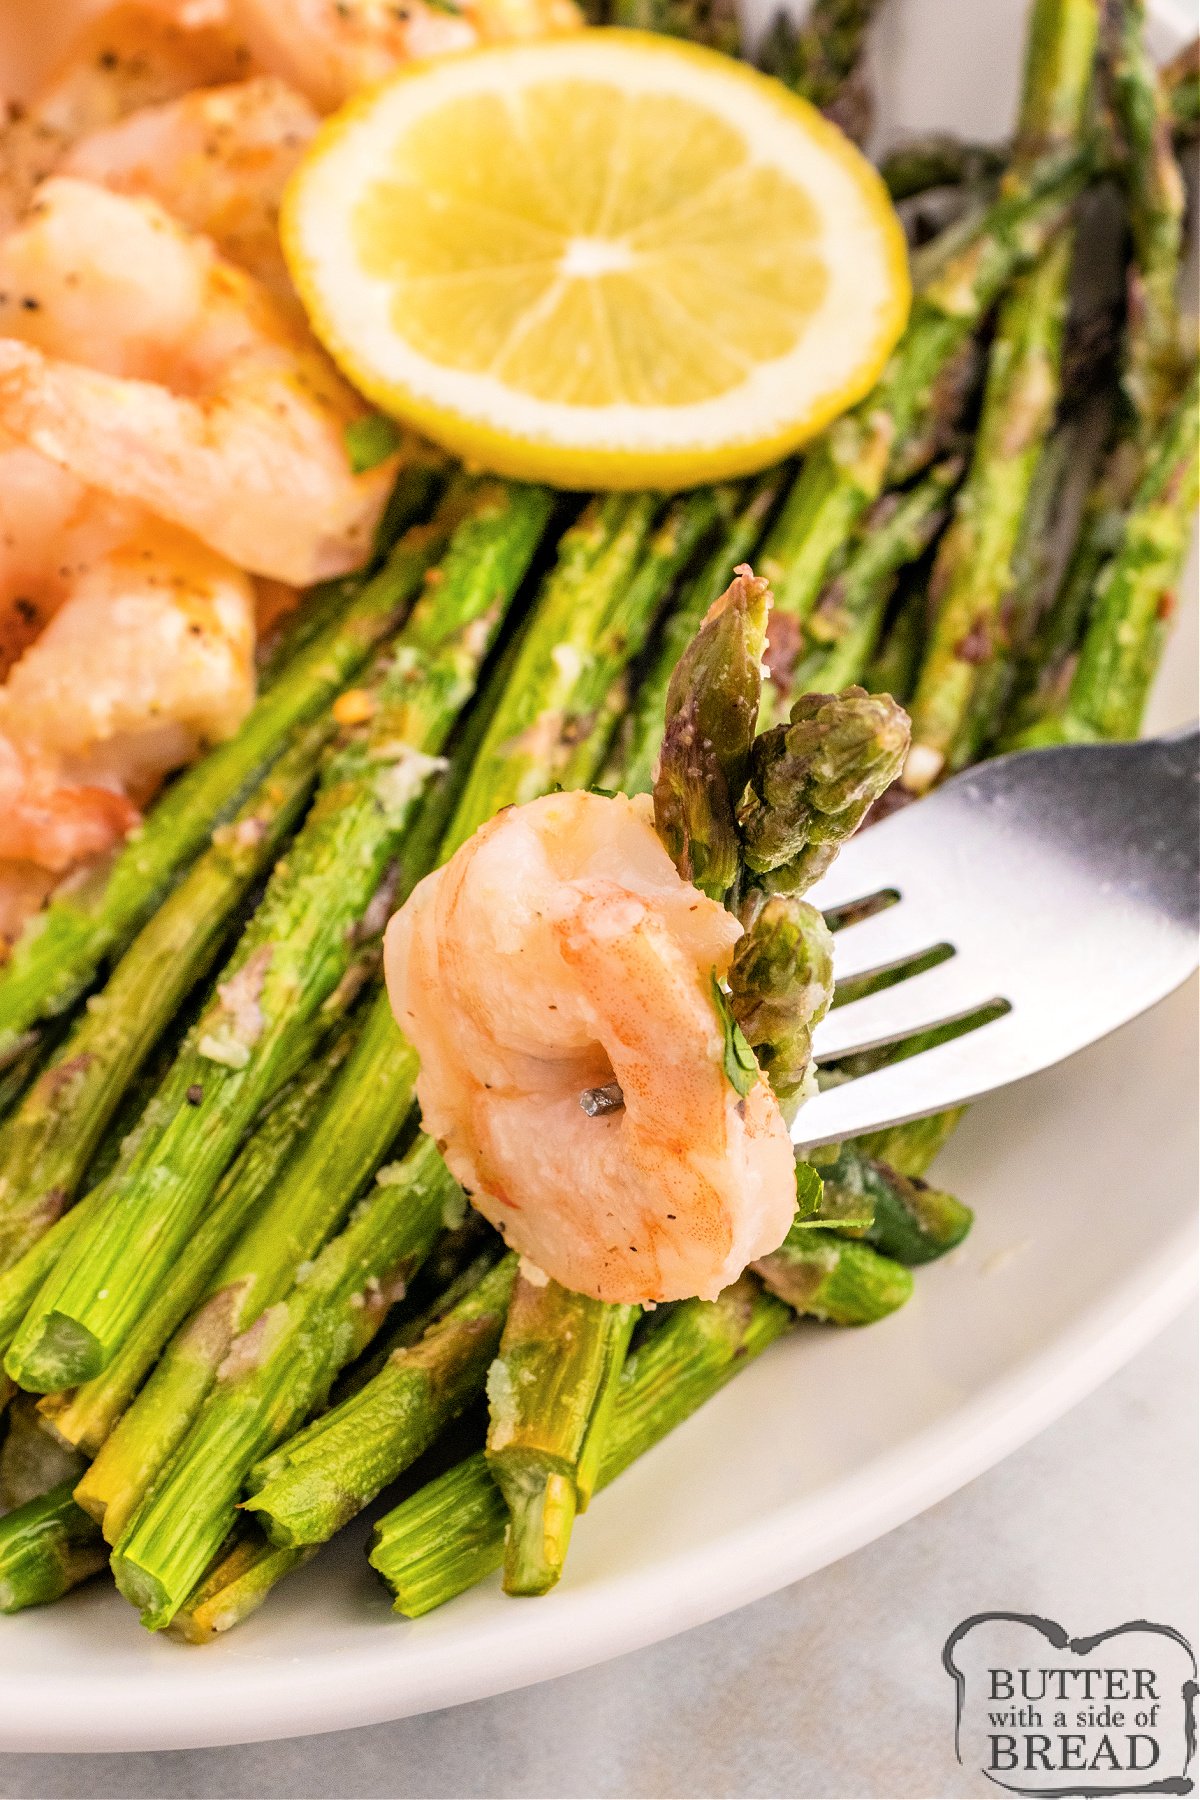 Sheet Pan Lemon Garlic Shrimp and Asparagus is a simple dinner ready in less than 30 minutes. A one-dish meal that is easy and delicious.